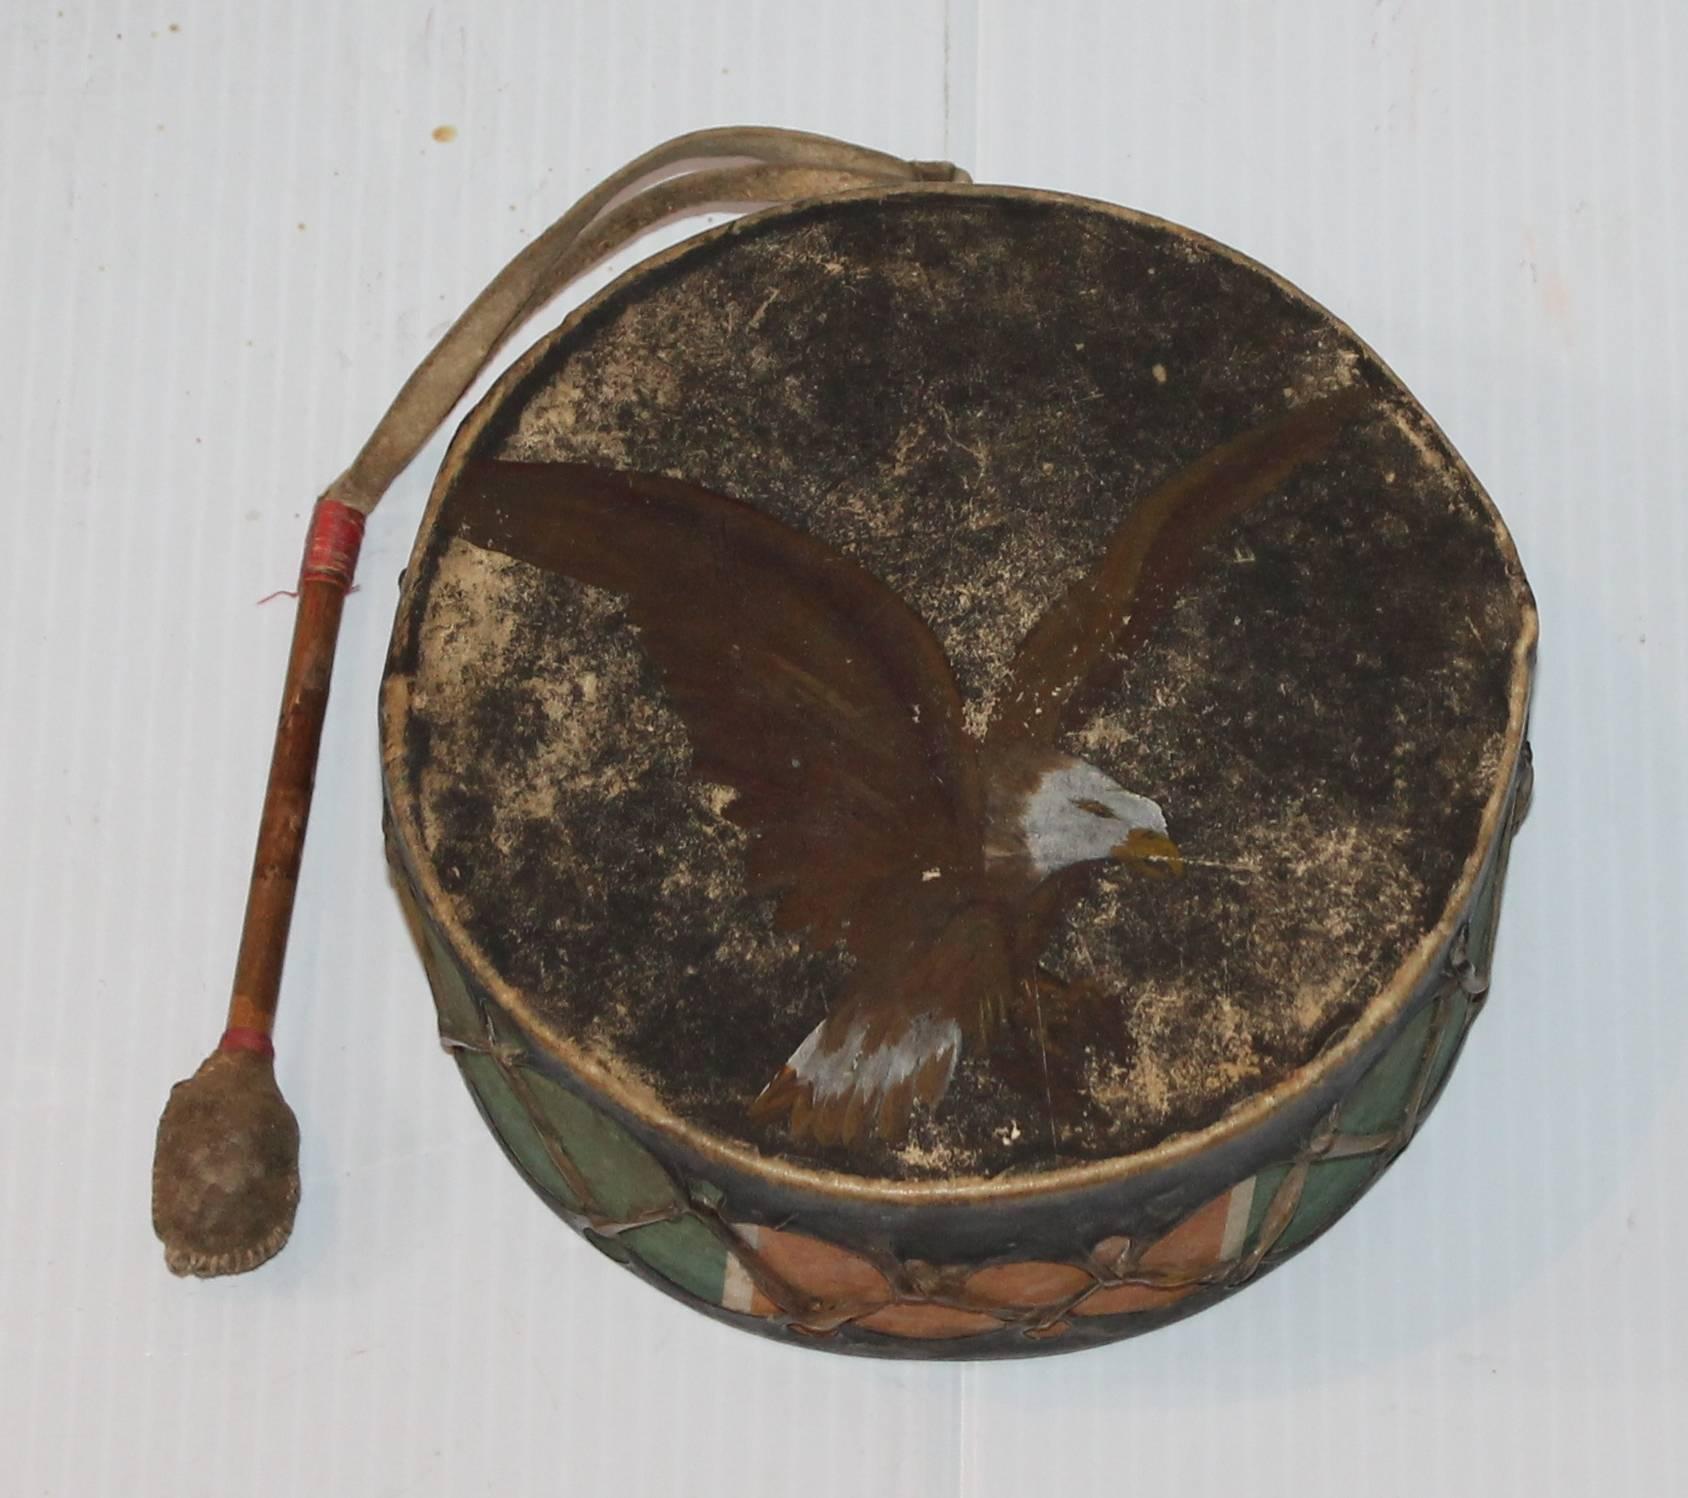 This fantastic rarity is in all original painted surface with the original handmade drum stick attached. The top of the drum has a painted eagle and the base has a coat of worn original black paint.